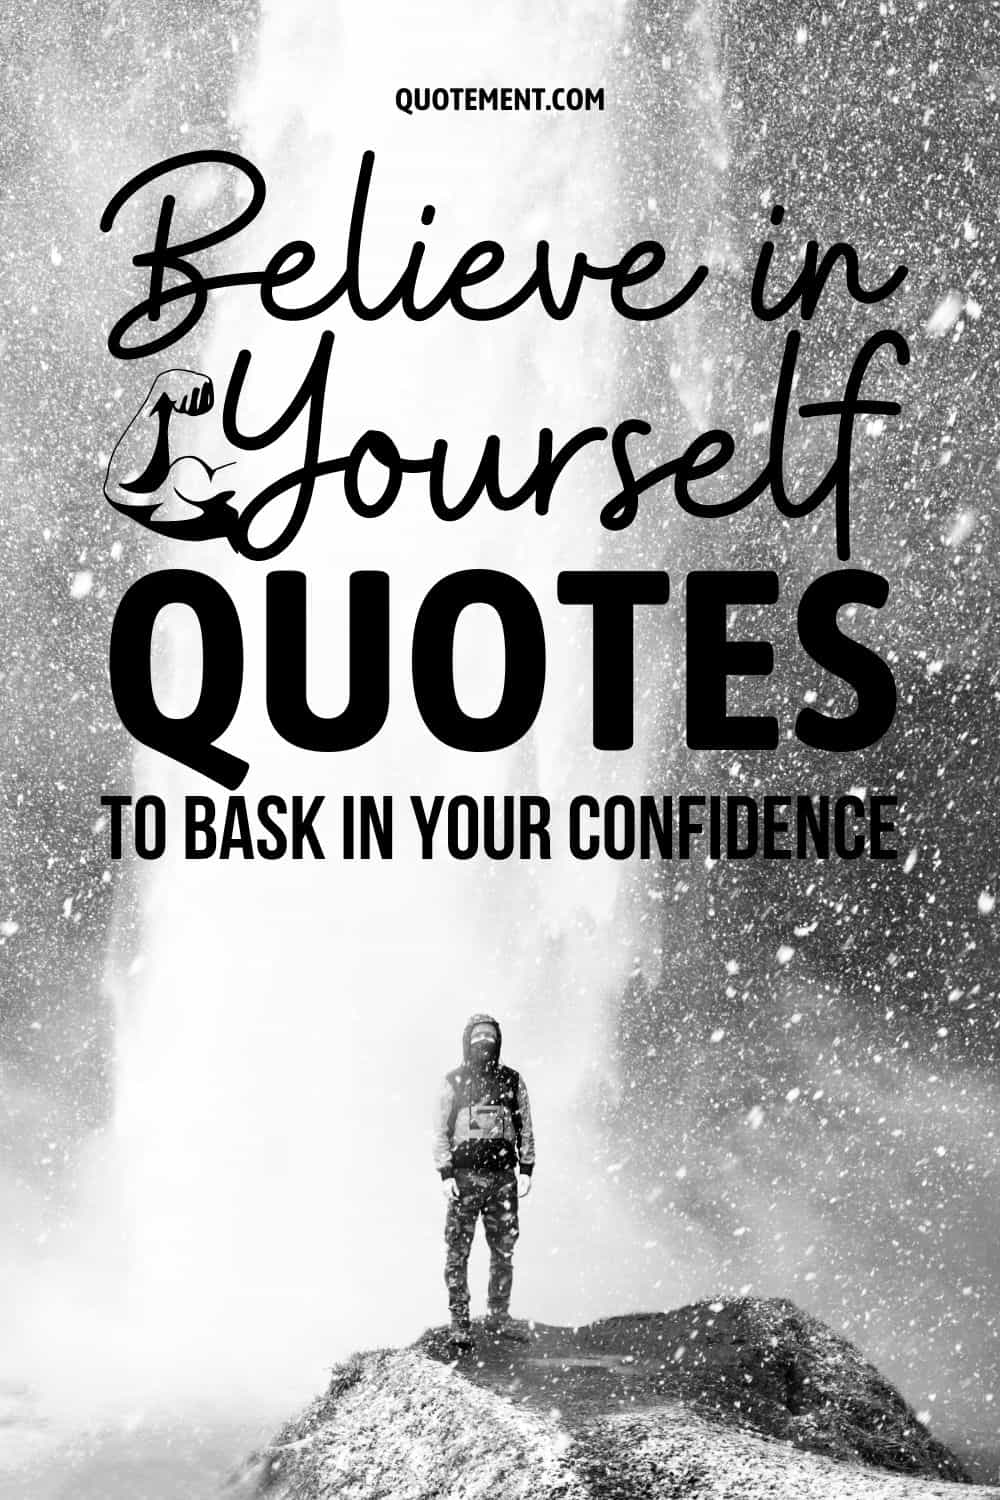 160 Believe In Yourself Quotes To Bask In Your Confidence